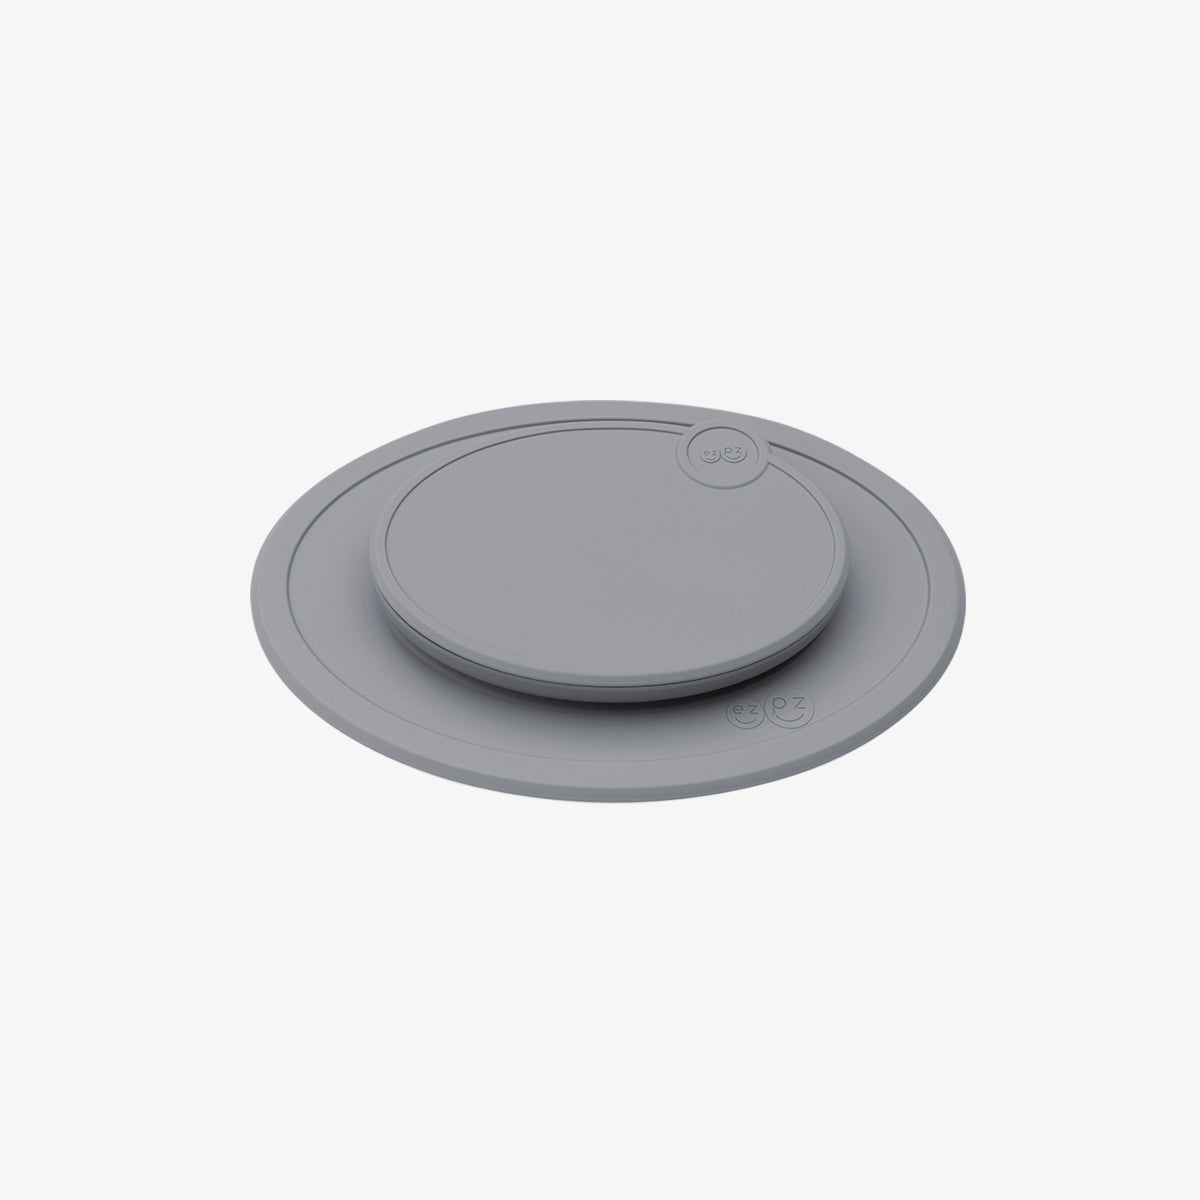 Mini Mat Lid in Gray / Storage Lids for the Mini Mat by ezpz / Silicone Lid for Toddler Plate